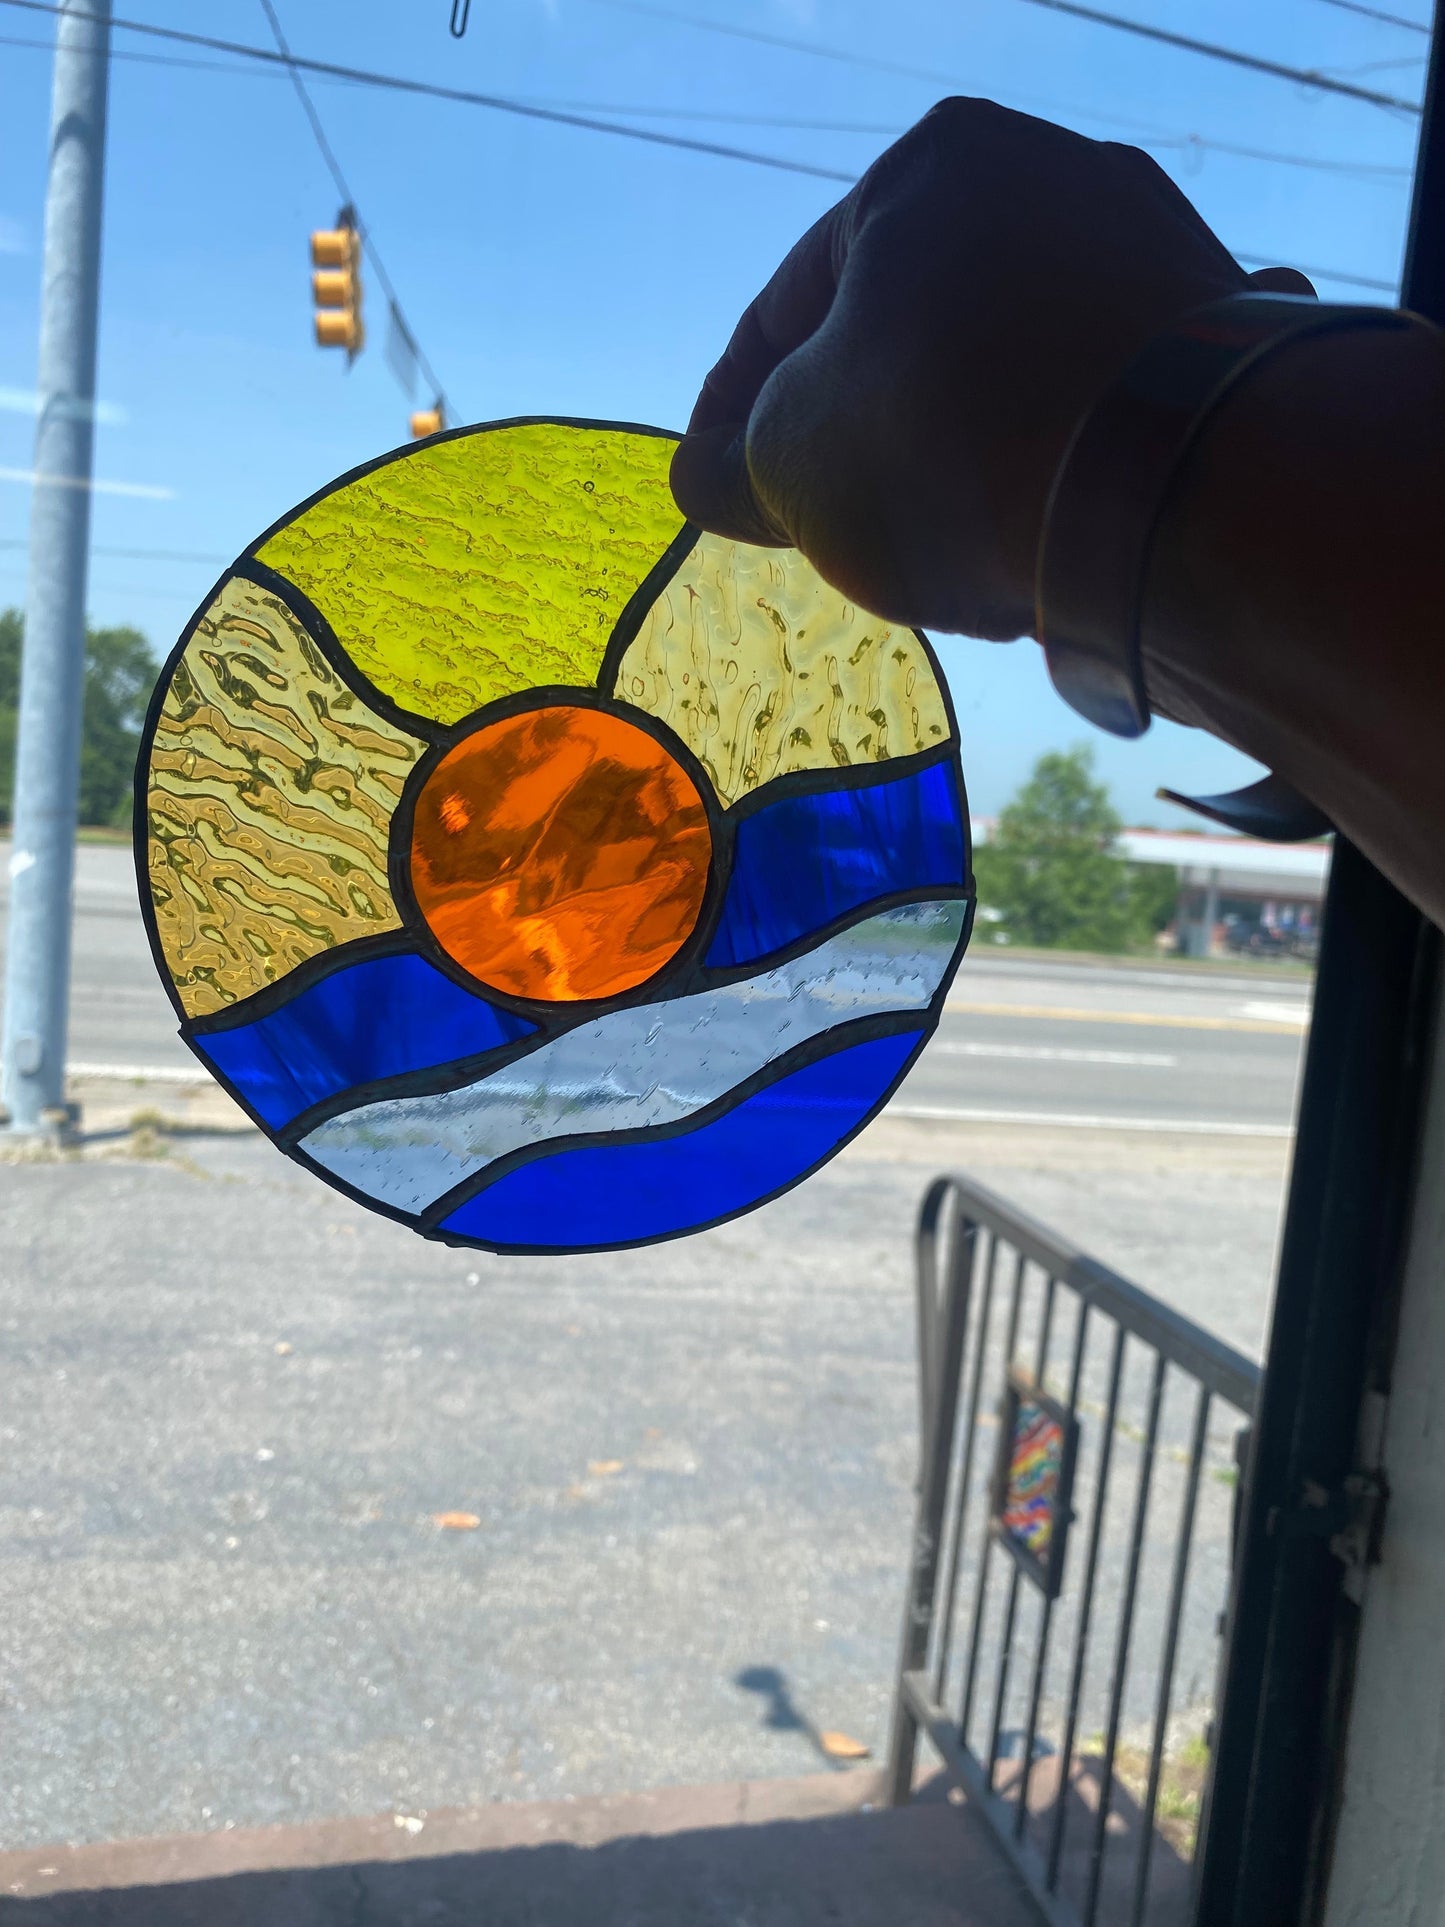 Beginner Stained Glass class, May 30,4 -6:00 pm